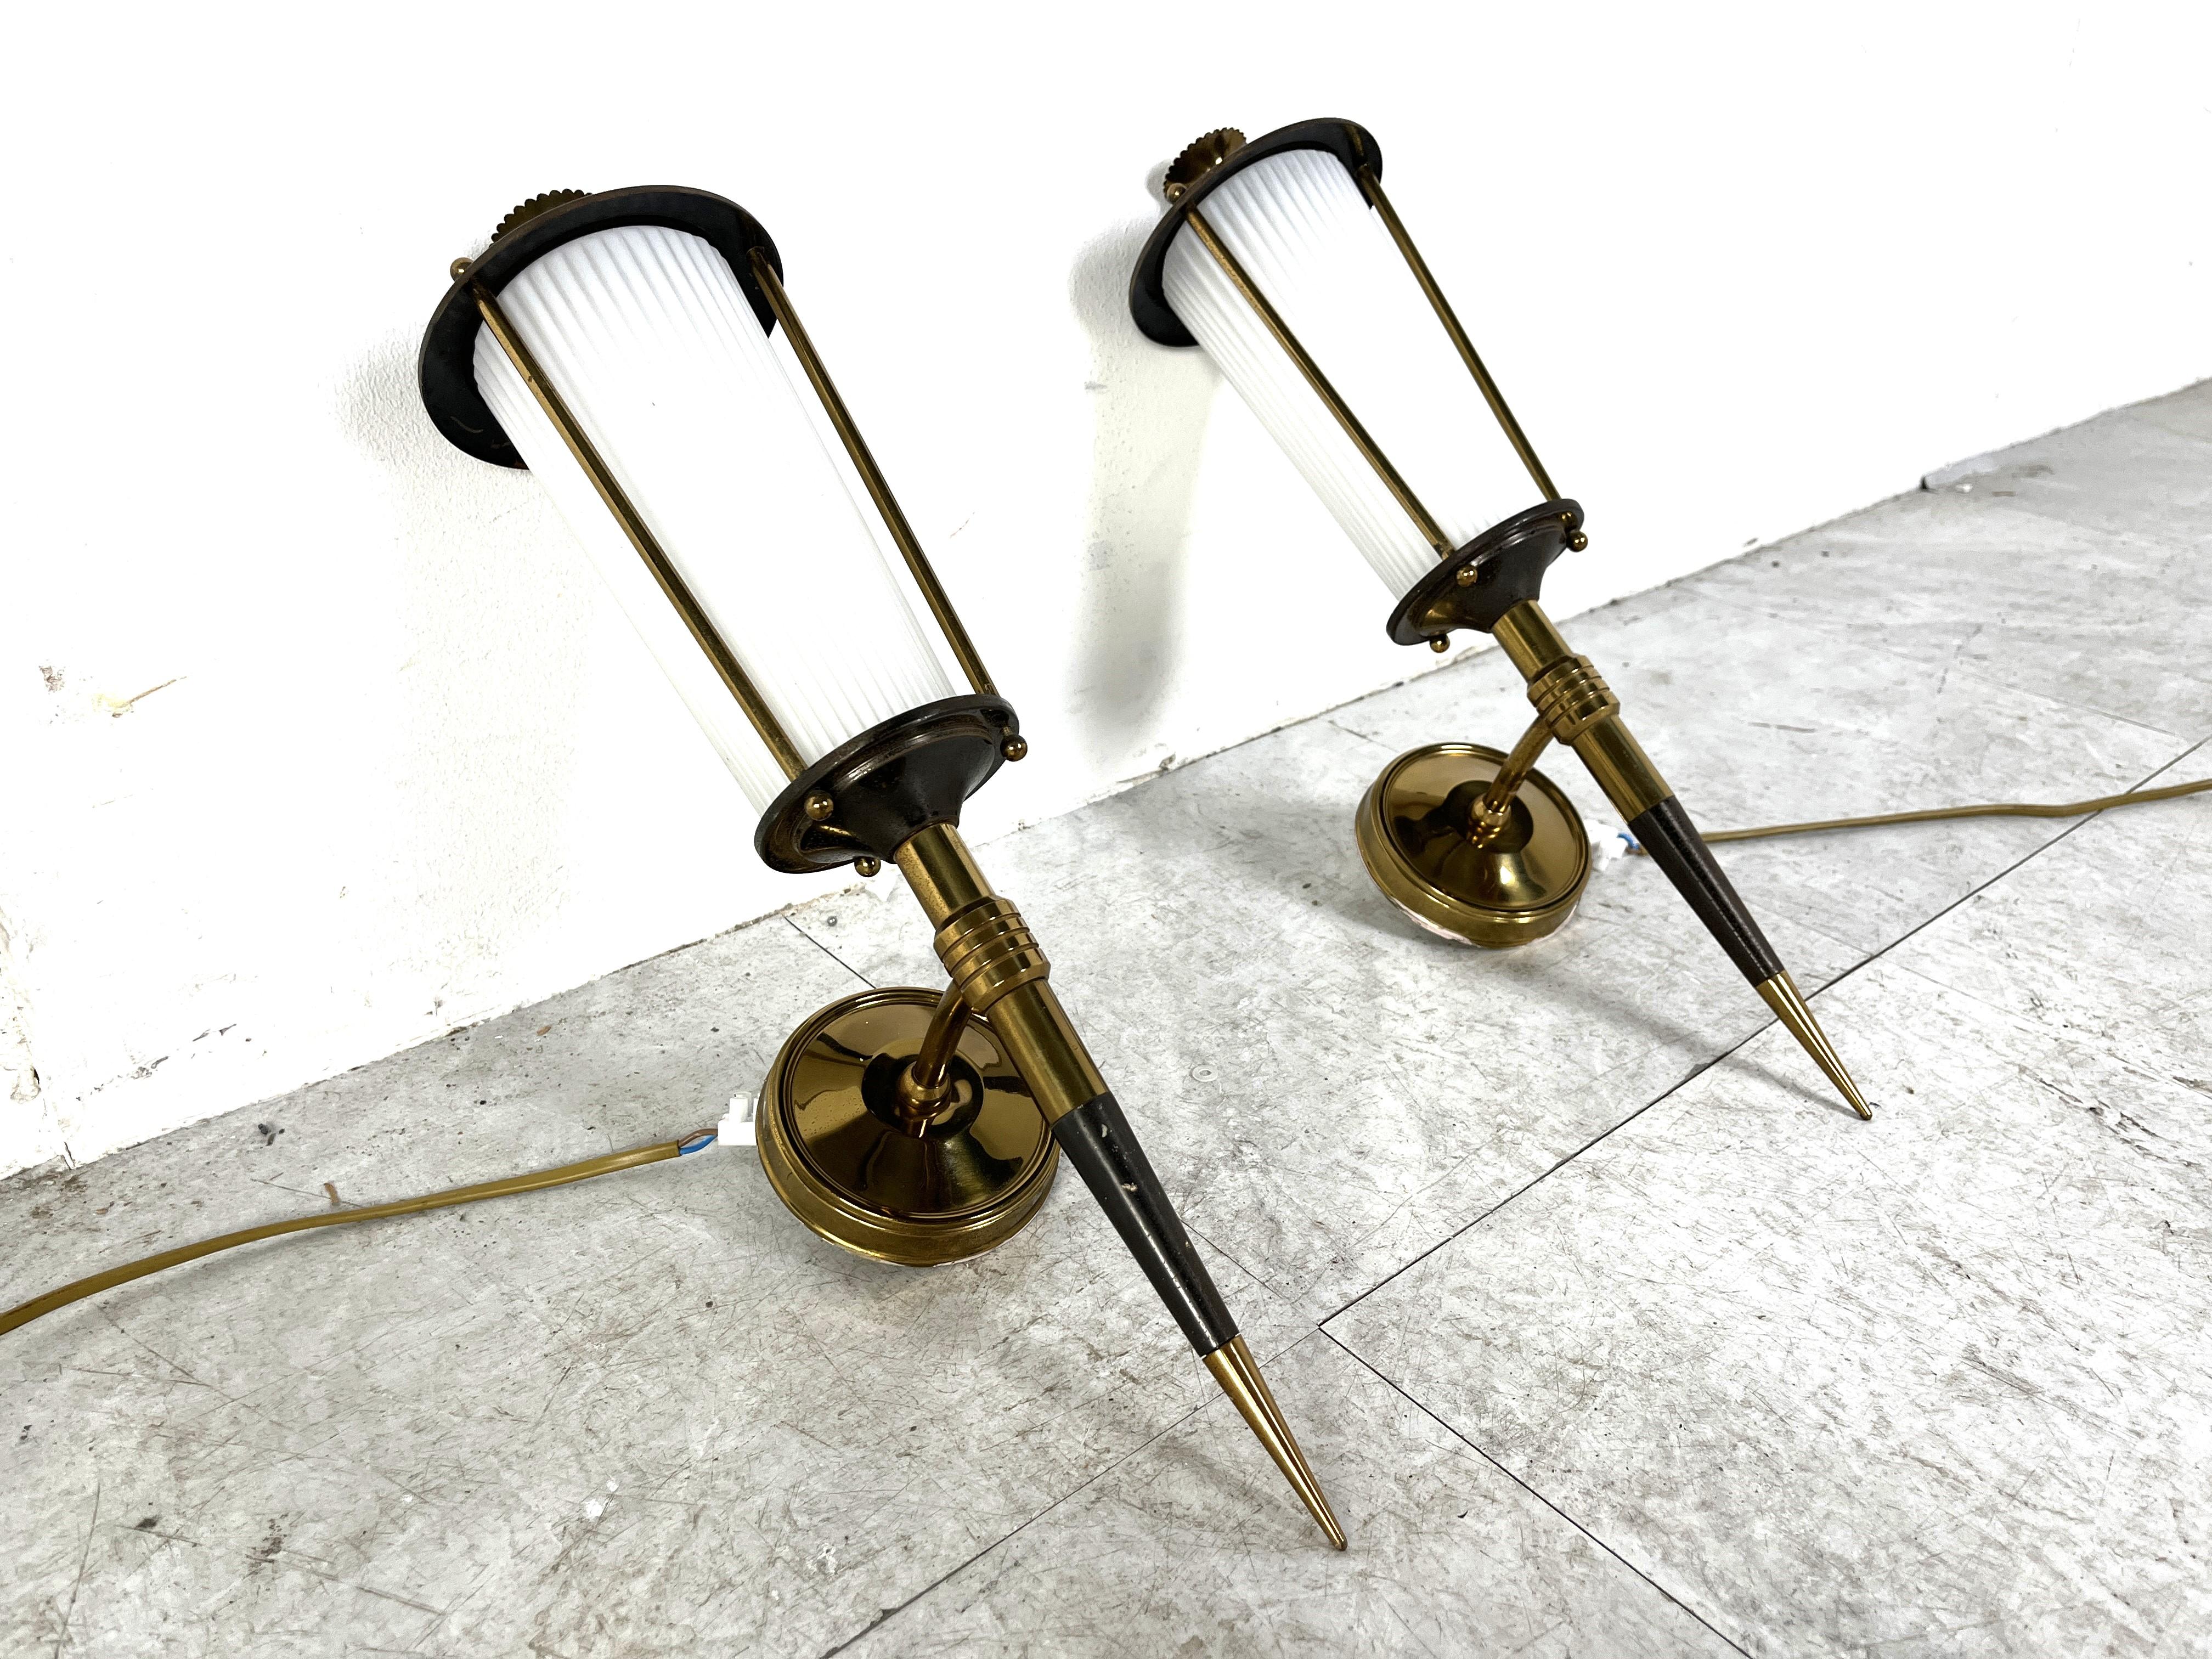 Mid century pair of wall sconces by Maison Arlus.

Very elegant mid century french design with brass, black metal and opal glass.

1950s - France

Tested and ready to use with two E14 lamps. 

Dimensions:
Height: 42cm/16.53